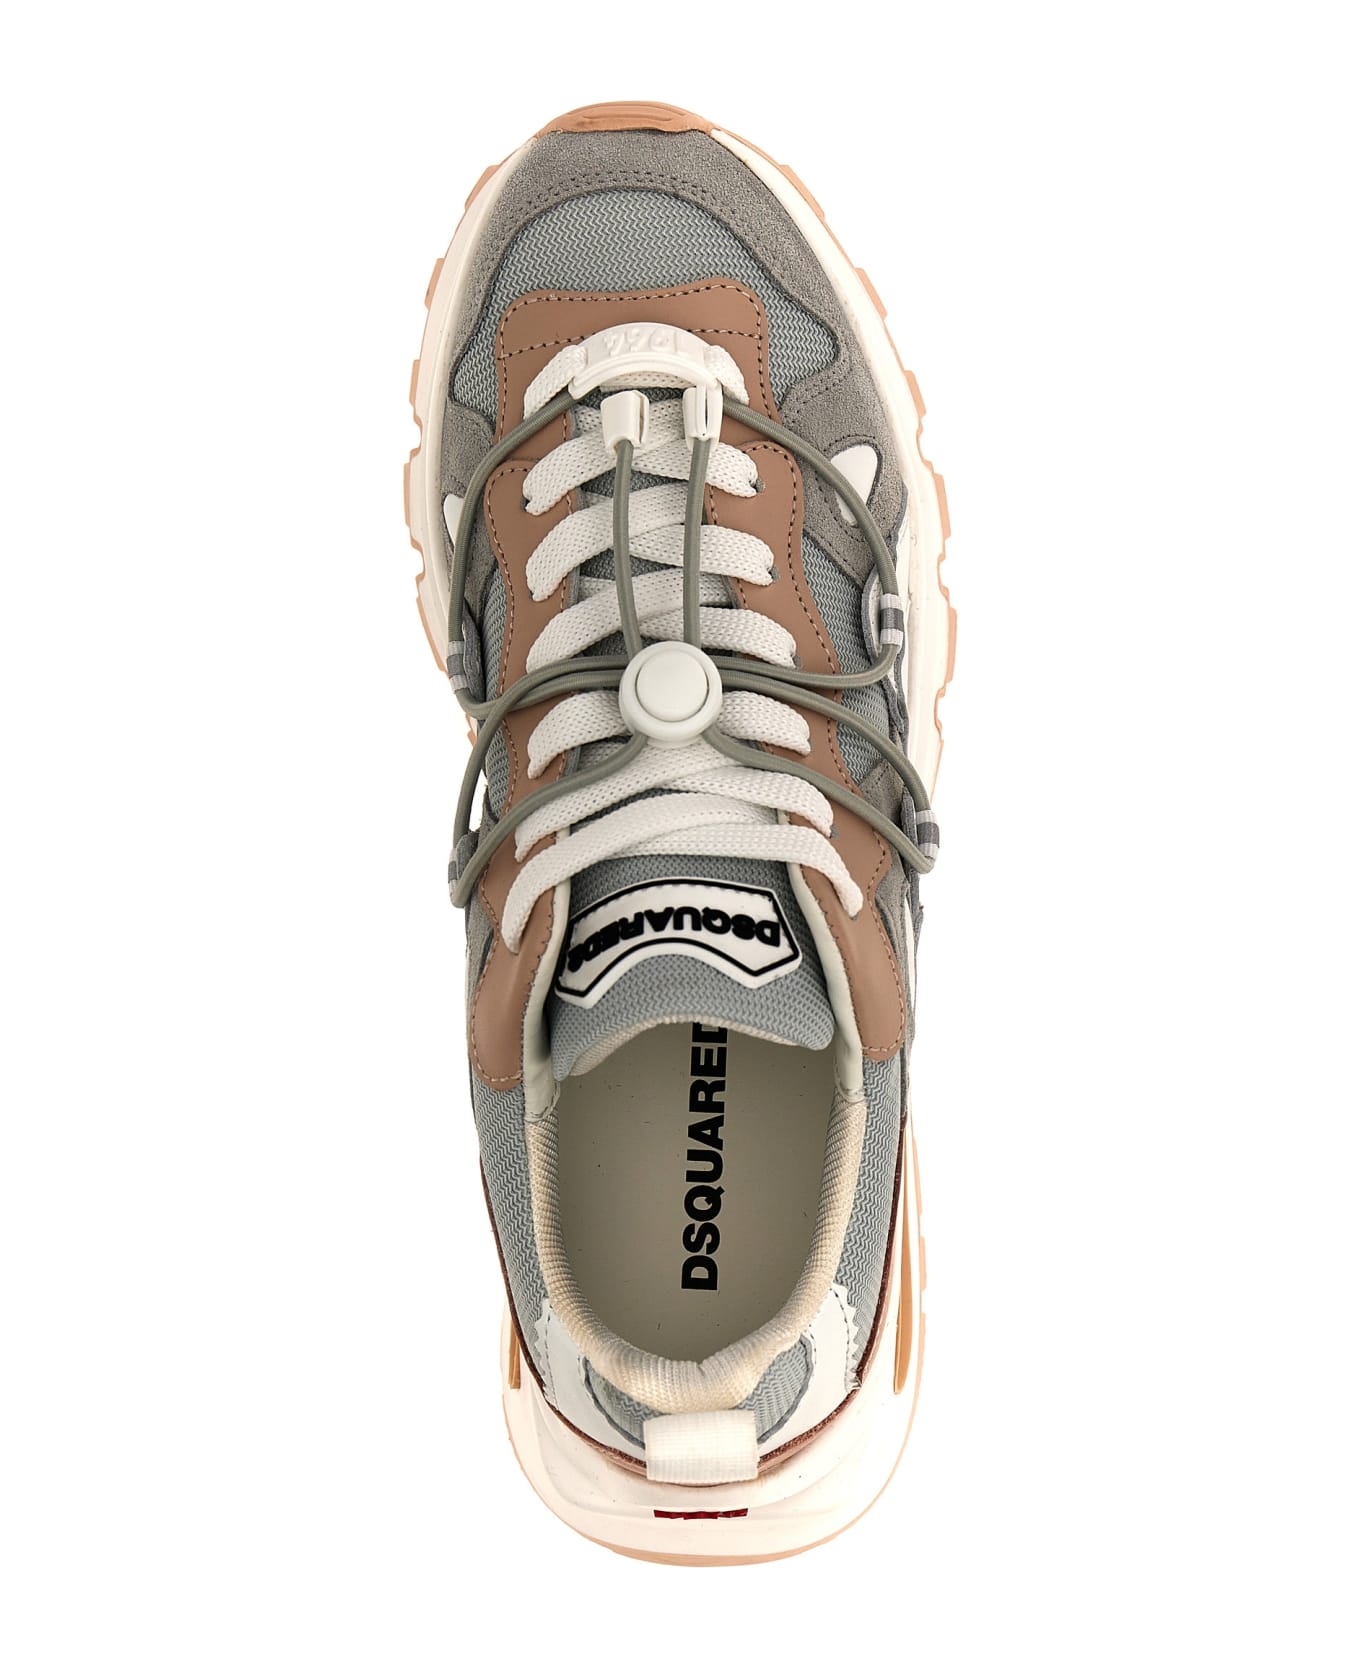 Dsquared2 Run Ds2 Sneakers - Grey スニーカー